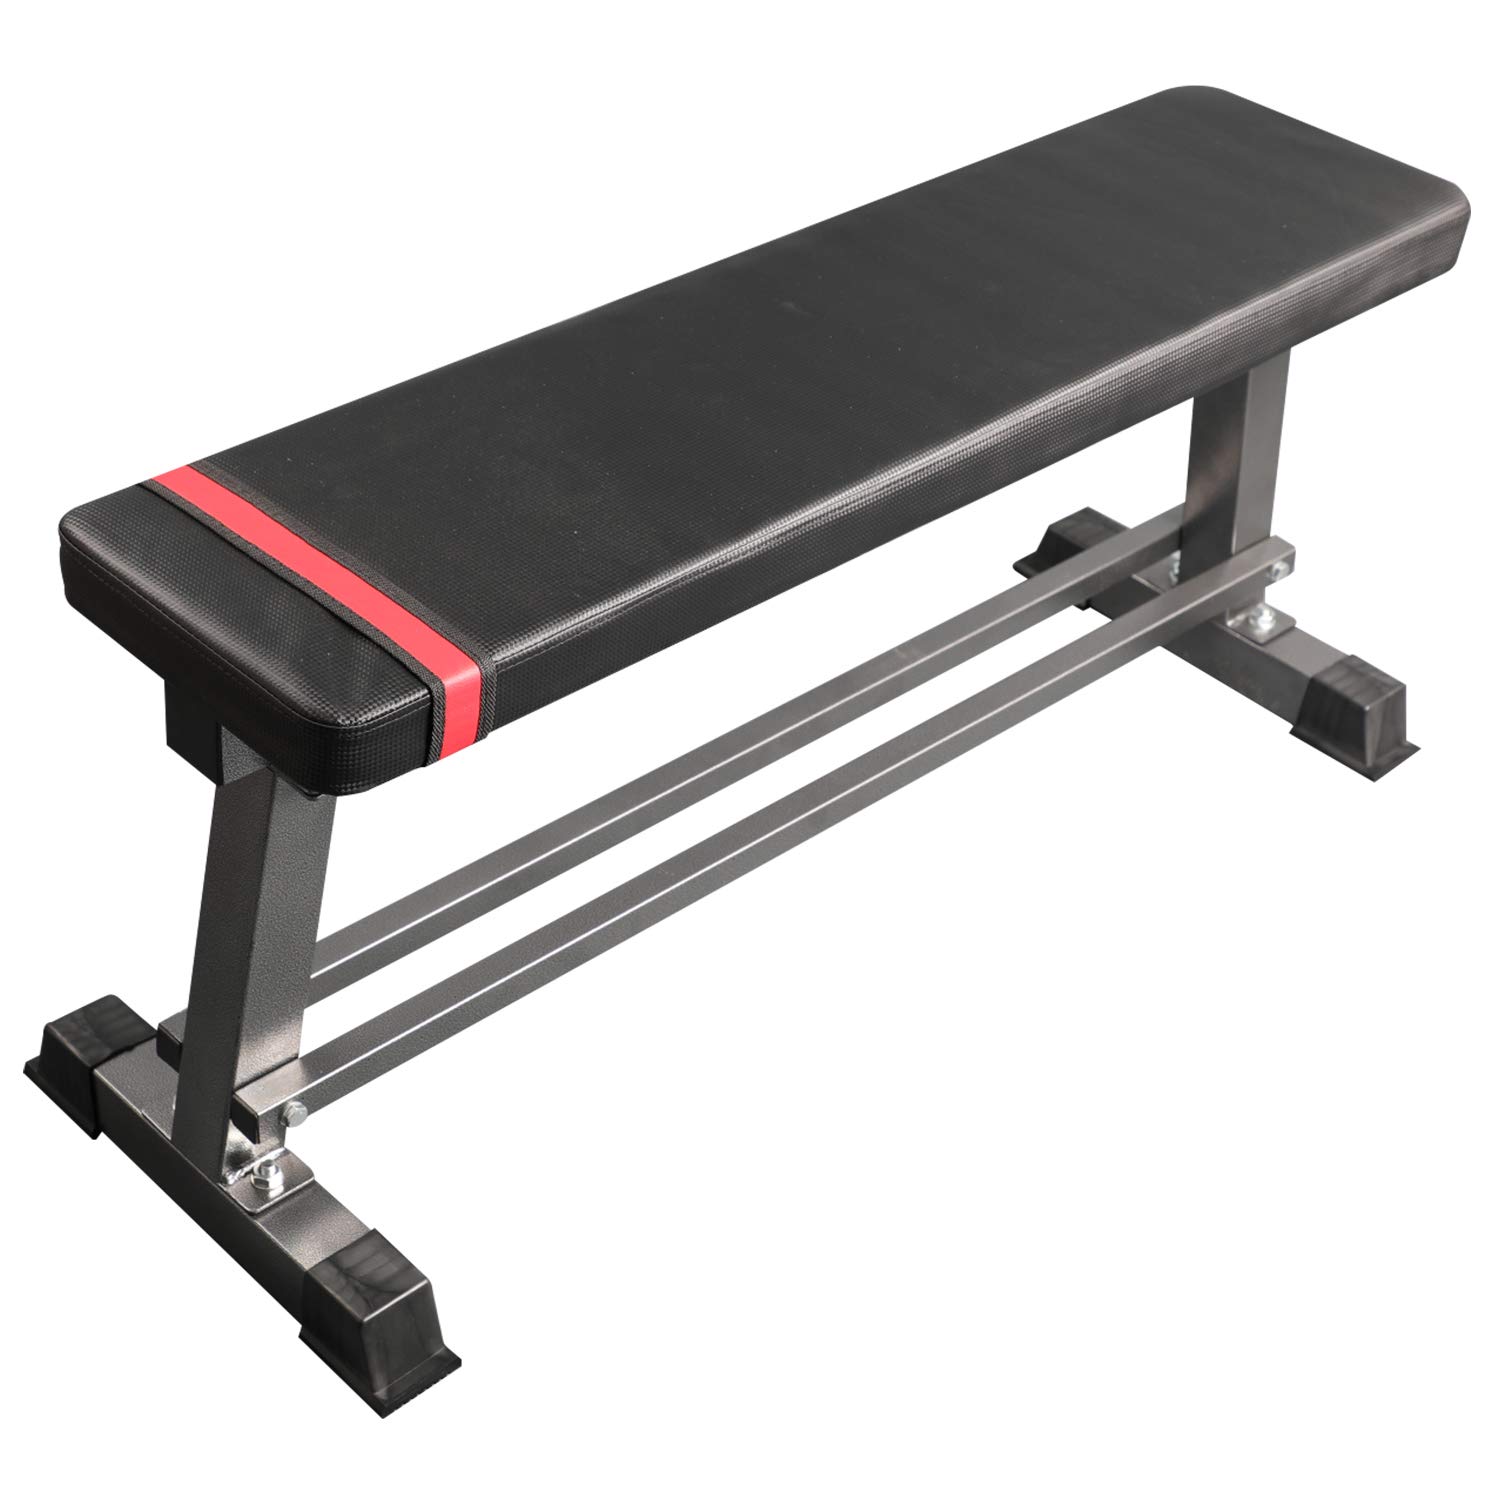 Flat Utility Weight Bench Gym Exercise Fitness Workout Home Training Black USA